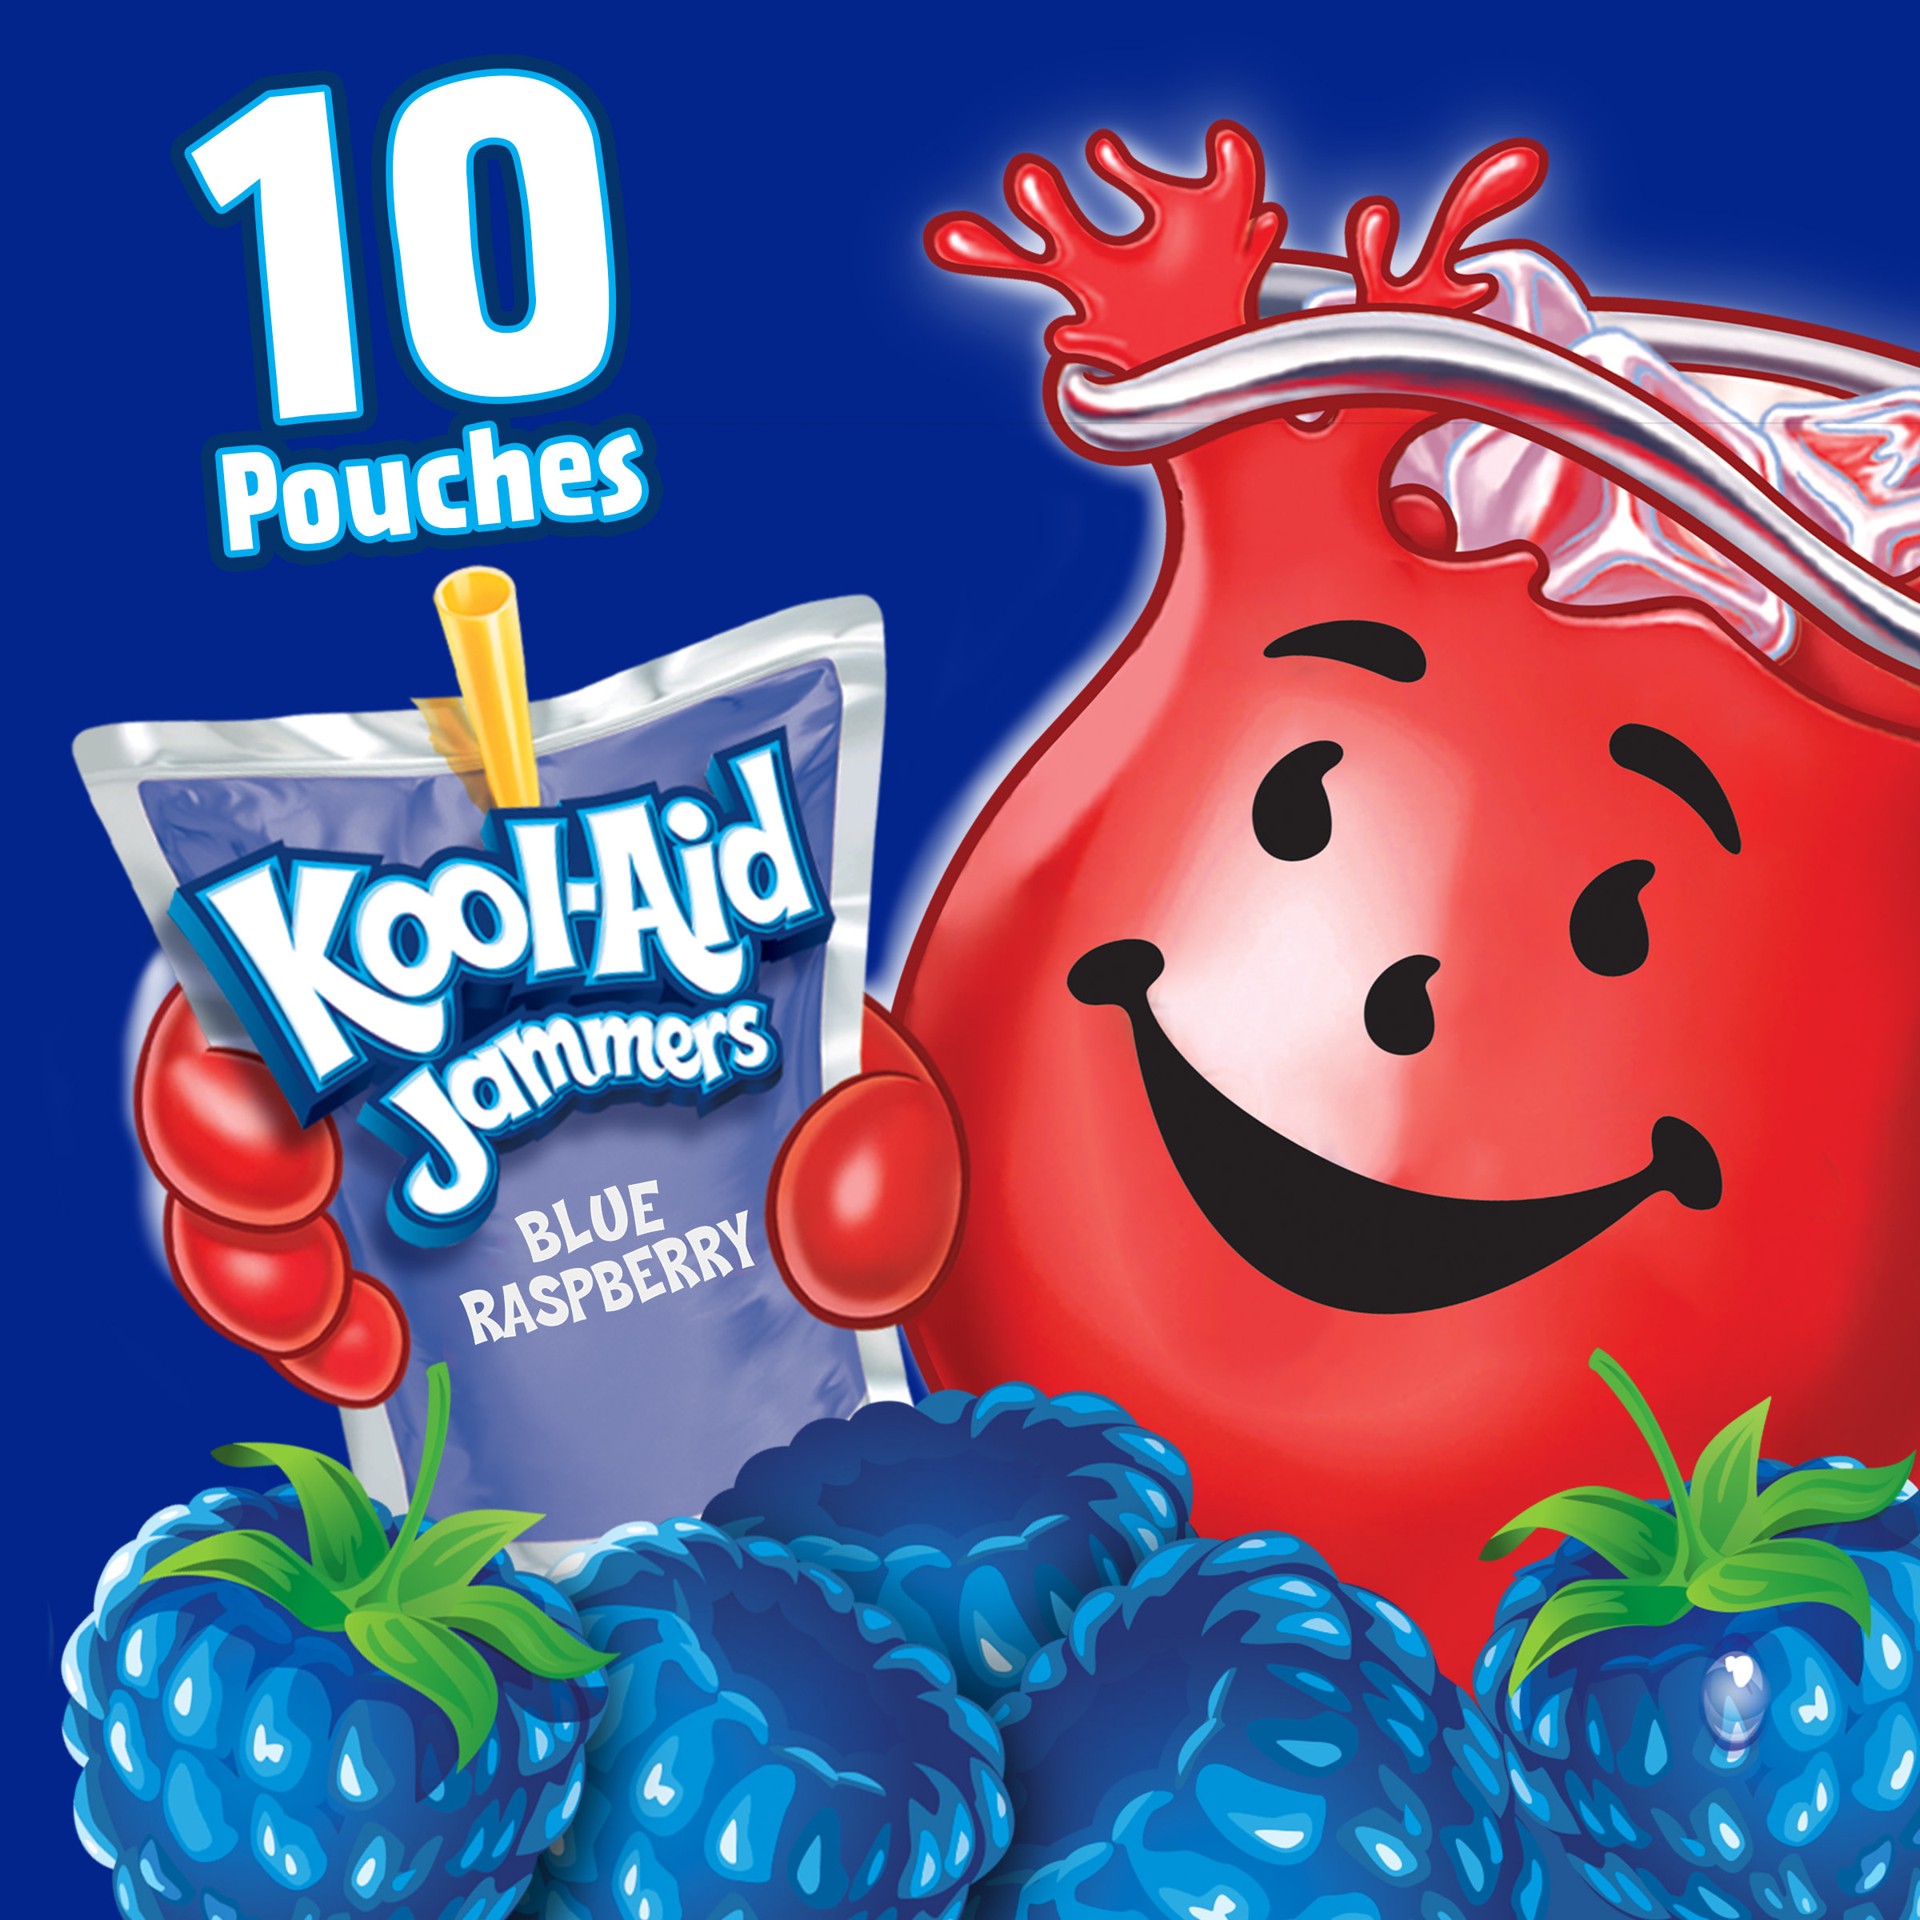 slide 5 of 5, Kool-Aid Jammers Blue Raspberry Flavored 0% Juice Drink, 10 ct Box, 6 fl oz Pouches, 10 ct; 6 fl oz